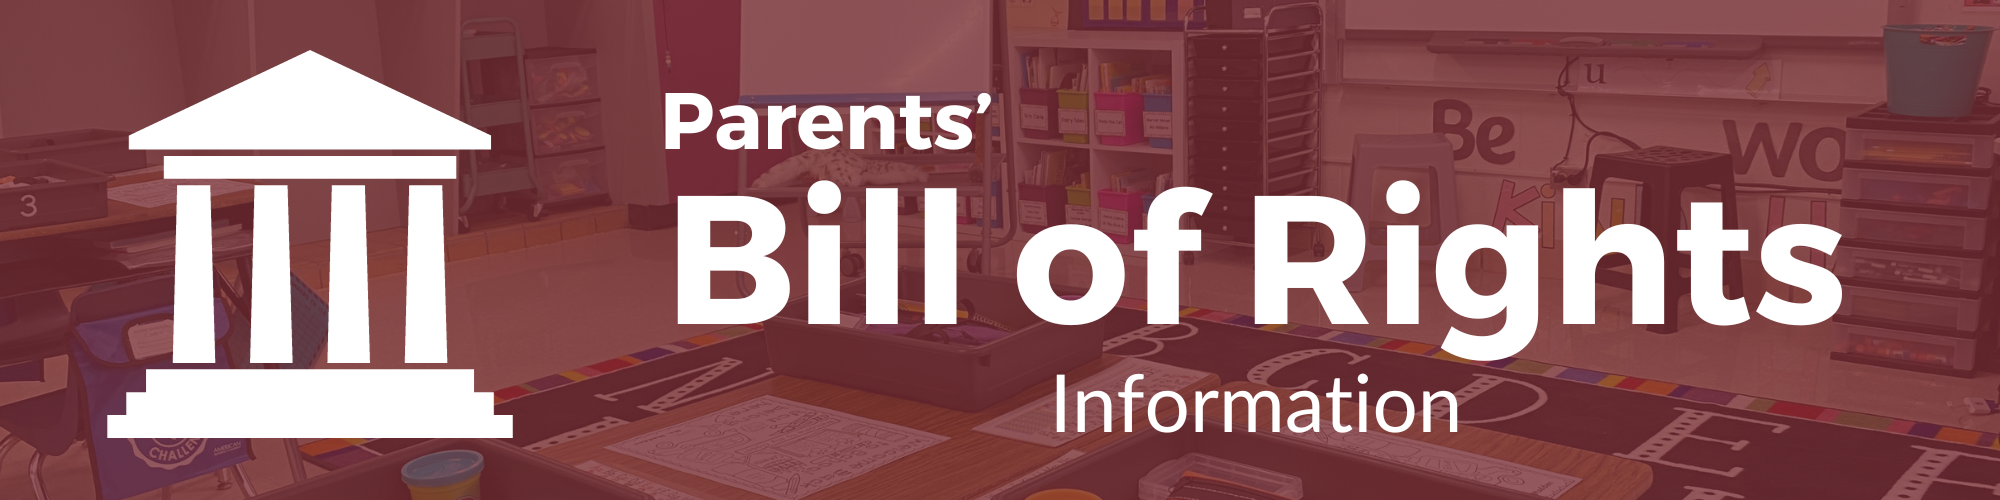 Parents' Bill of Rights Information text over top of faded photo of classroom with a burgundy color overlay